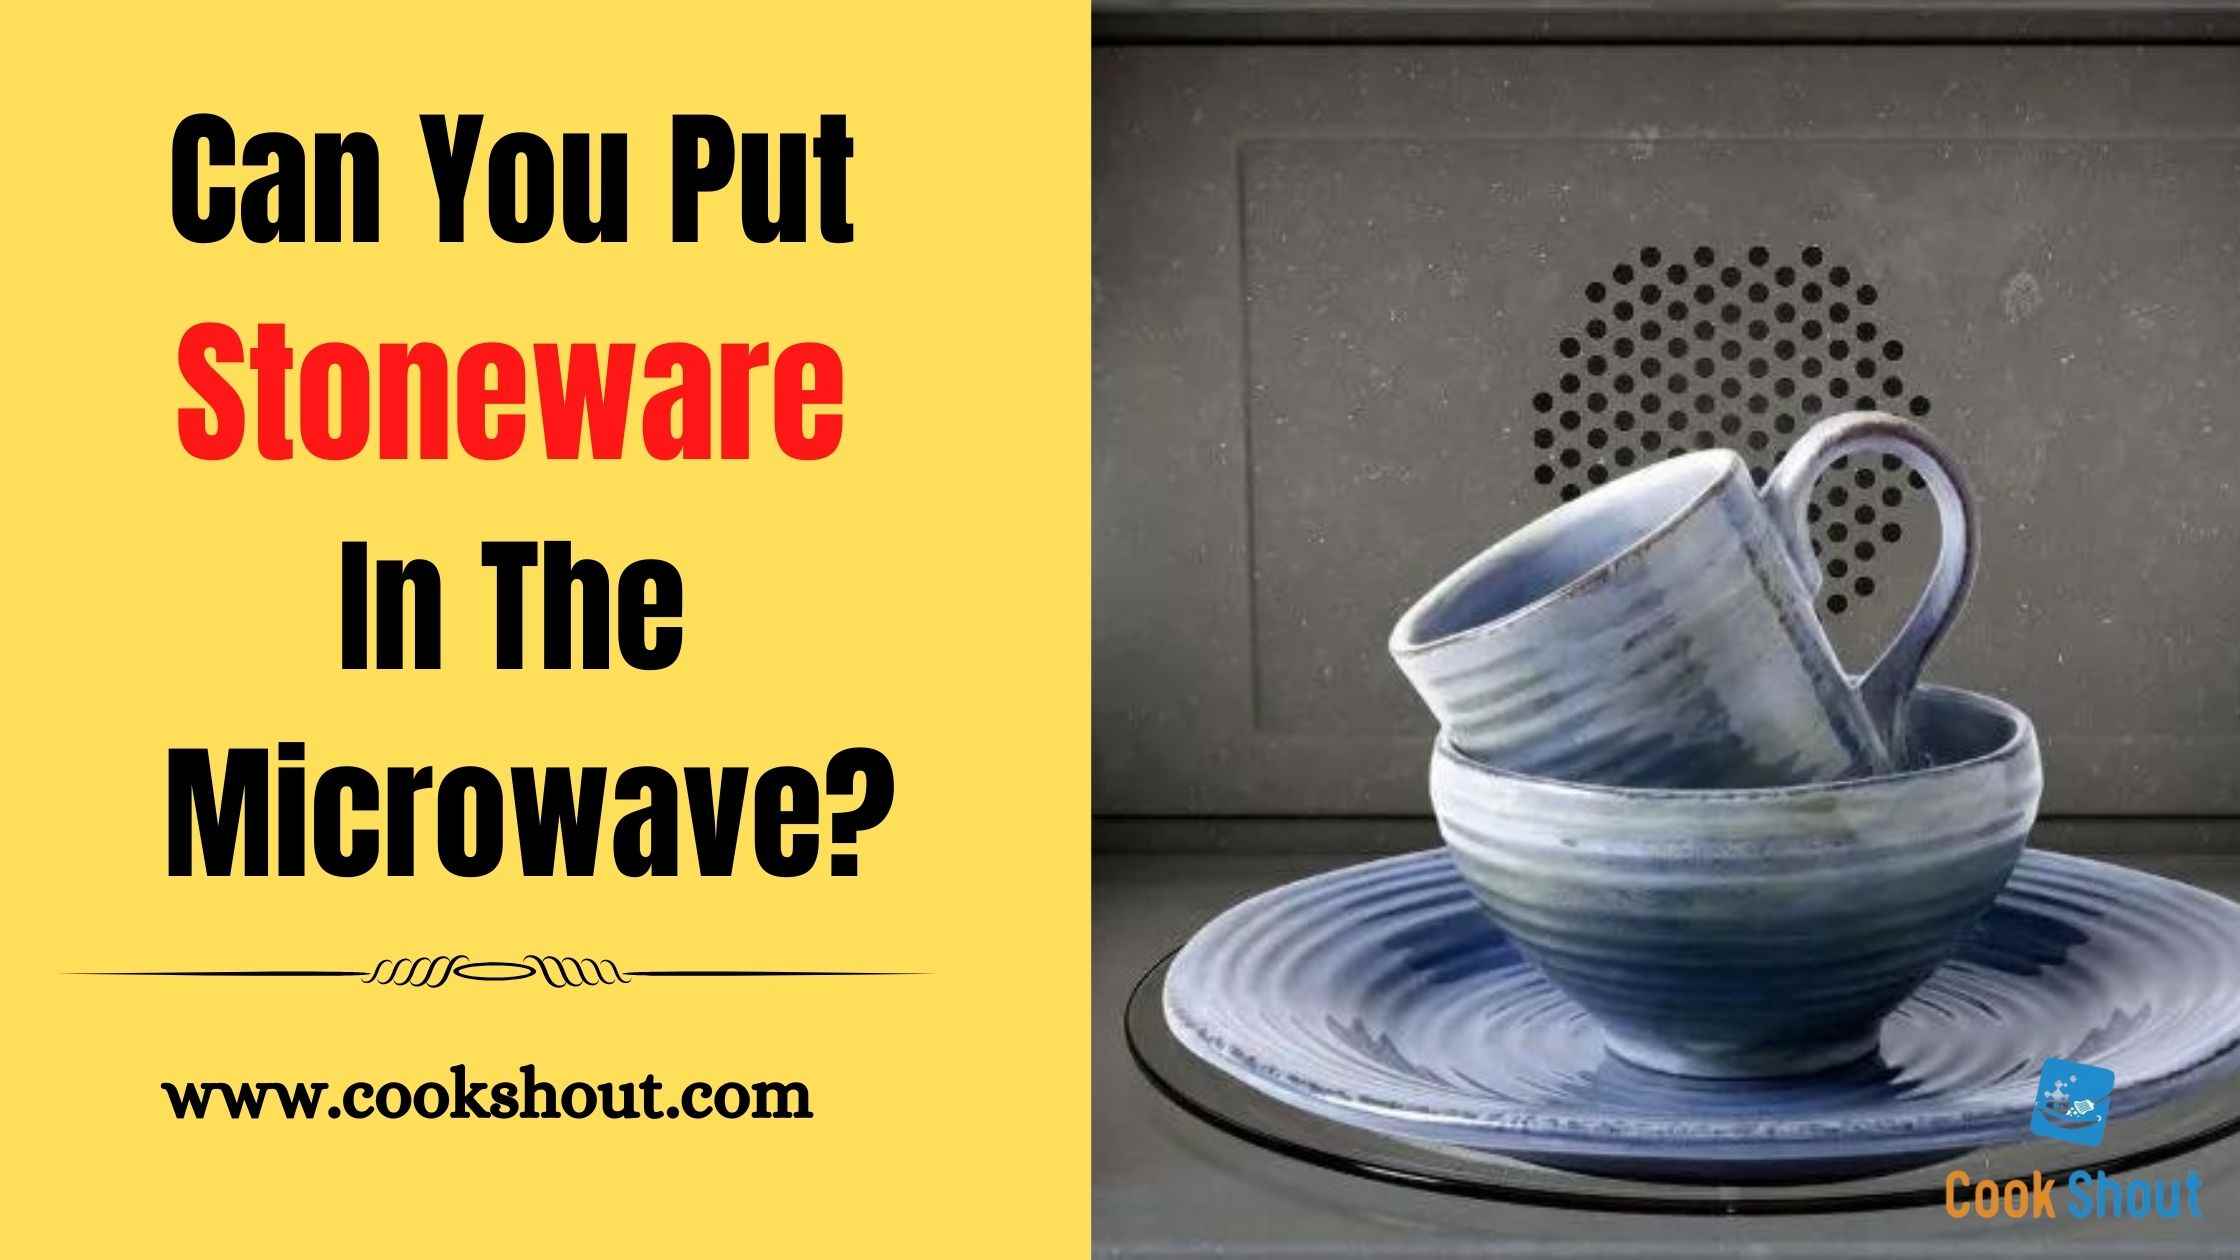 Can You Put Stoneware In the Microwave